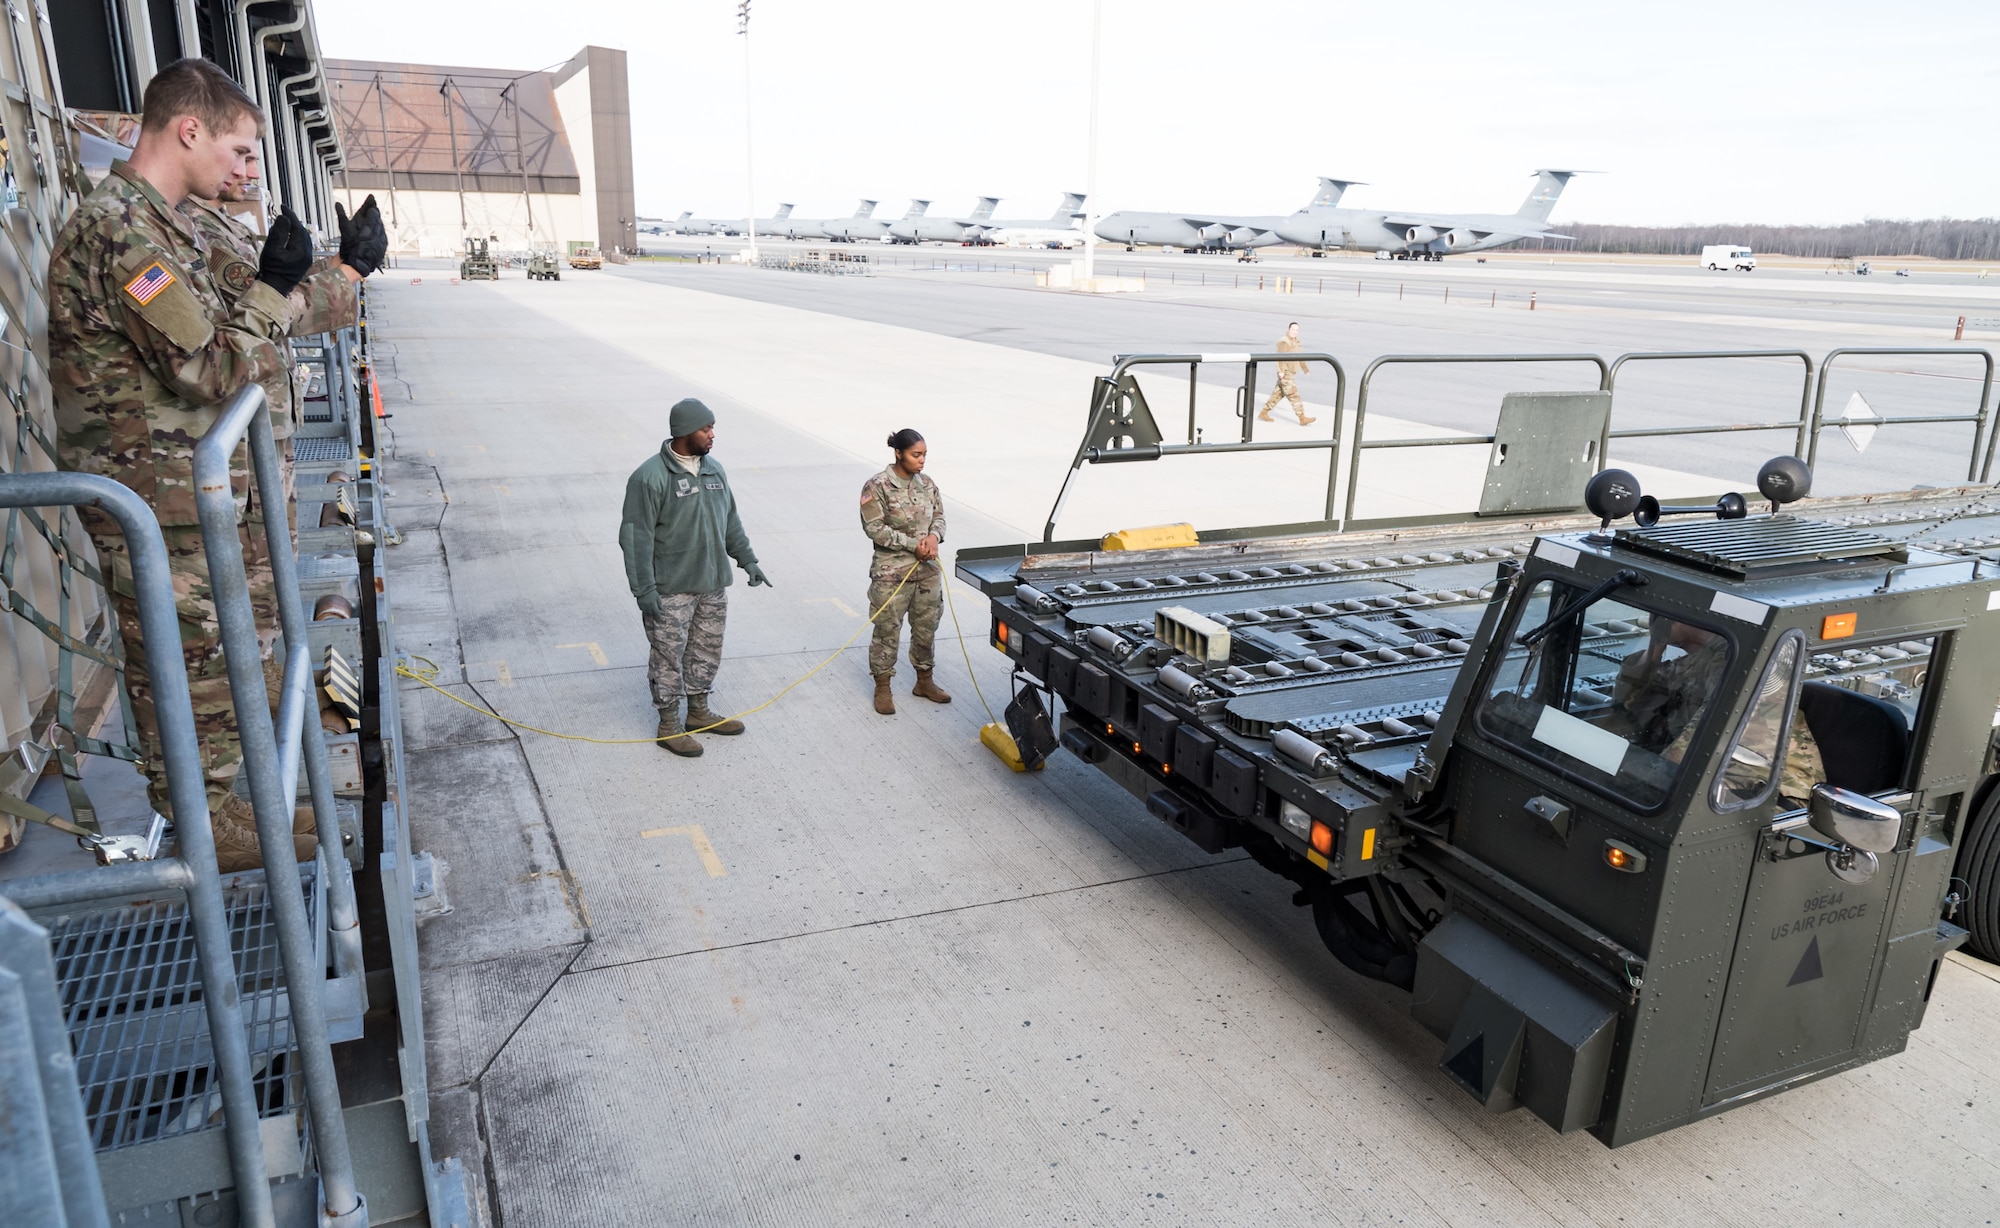 Members of the 436th Aerial Port Squadron instruct Army personnel on proper pallet loading onto a 60-ton K-loader Jan. 10, 2020, on Dover Air Force Base, Del. In a scheduled joint partnership training event, 16 members from the 622nd Movement Control Team, Joint Base Langley-Eustis, Va., came to Dover AFB for cargo and personnel processing training. (U.S. Air Force photo by Roland Balik)